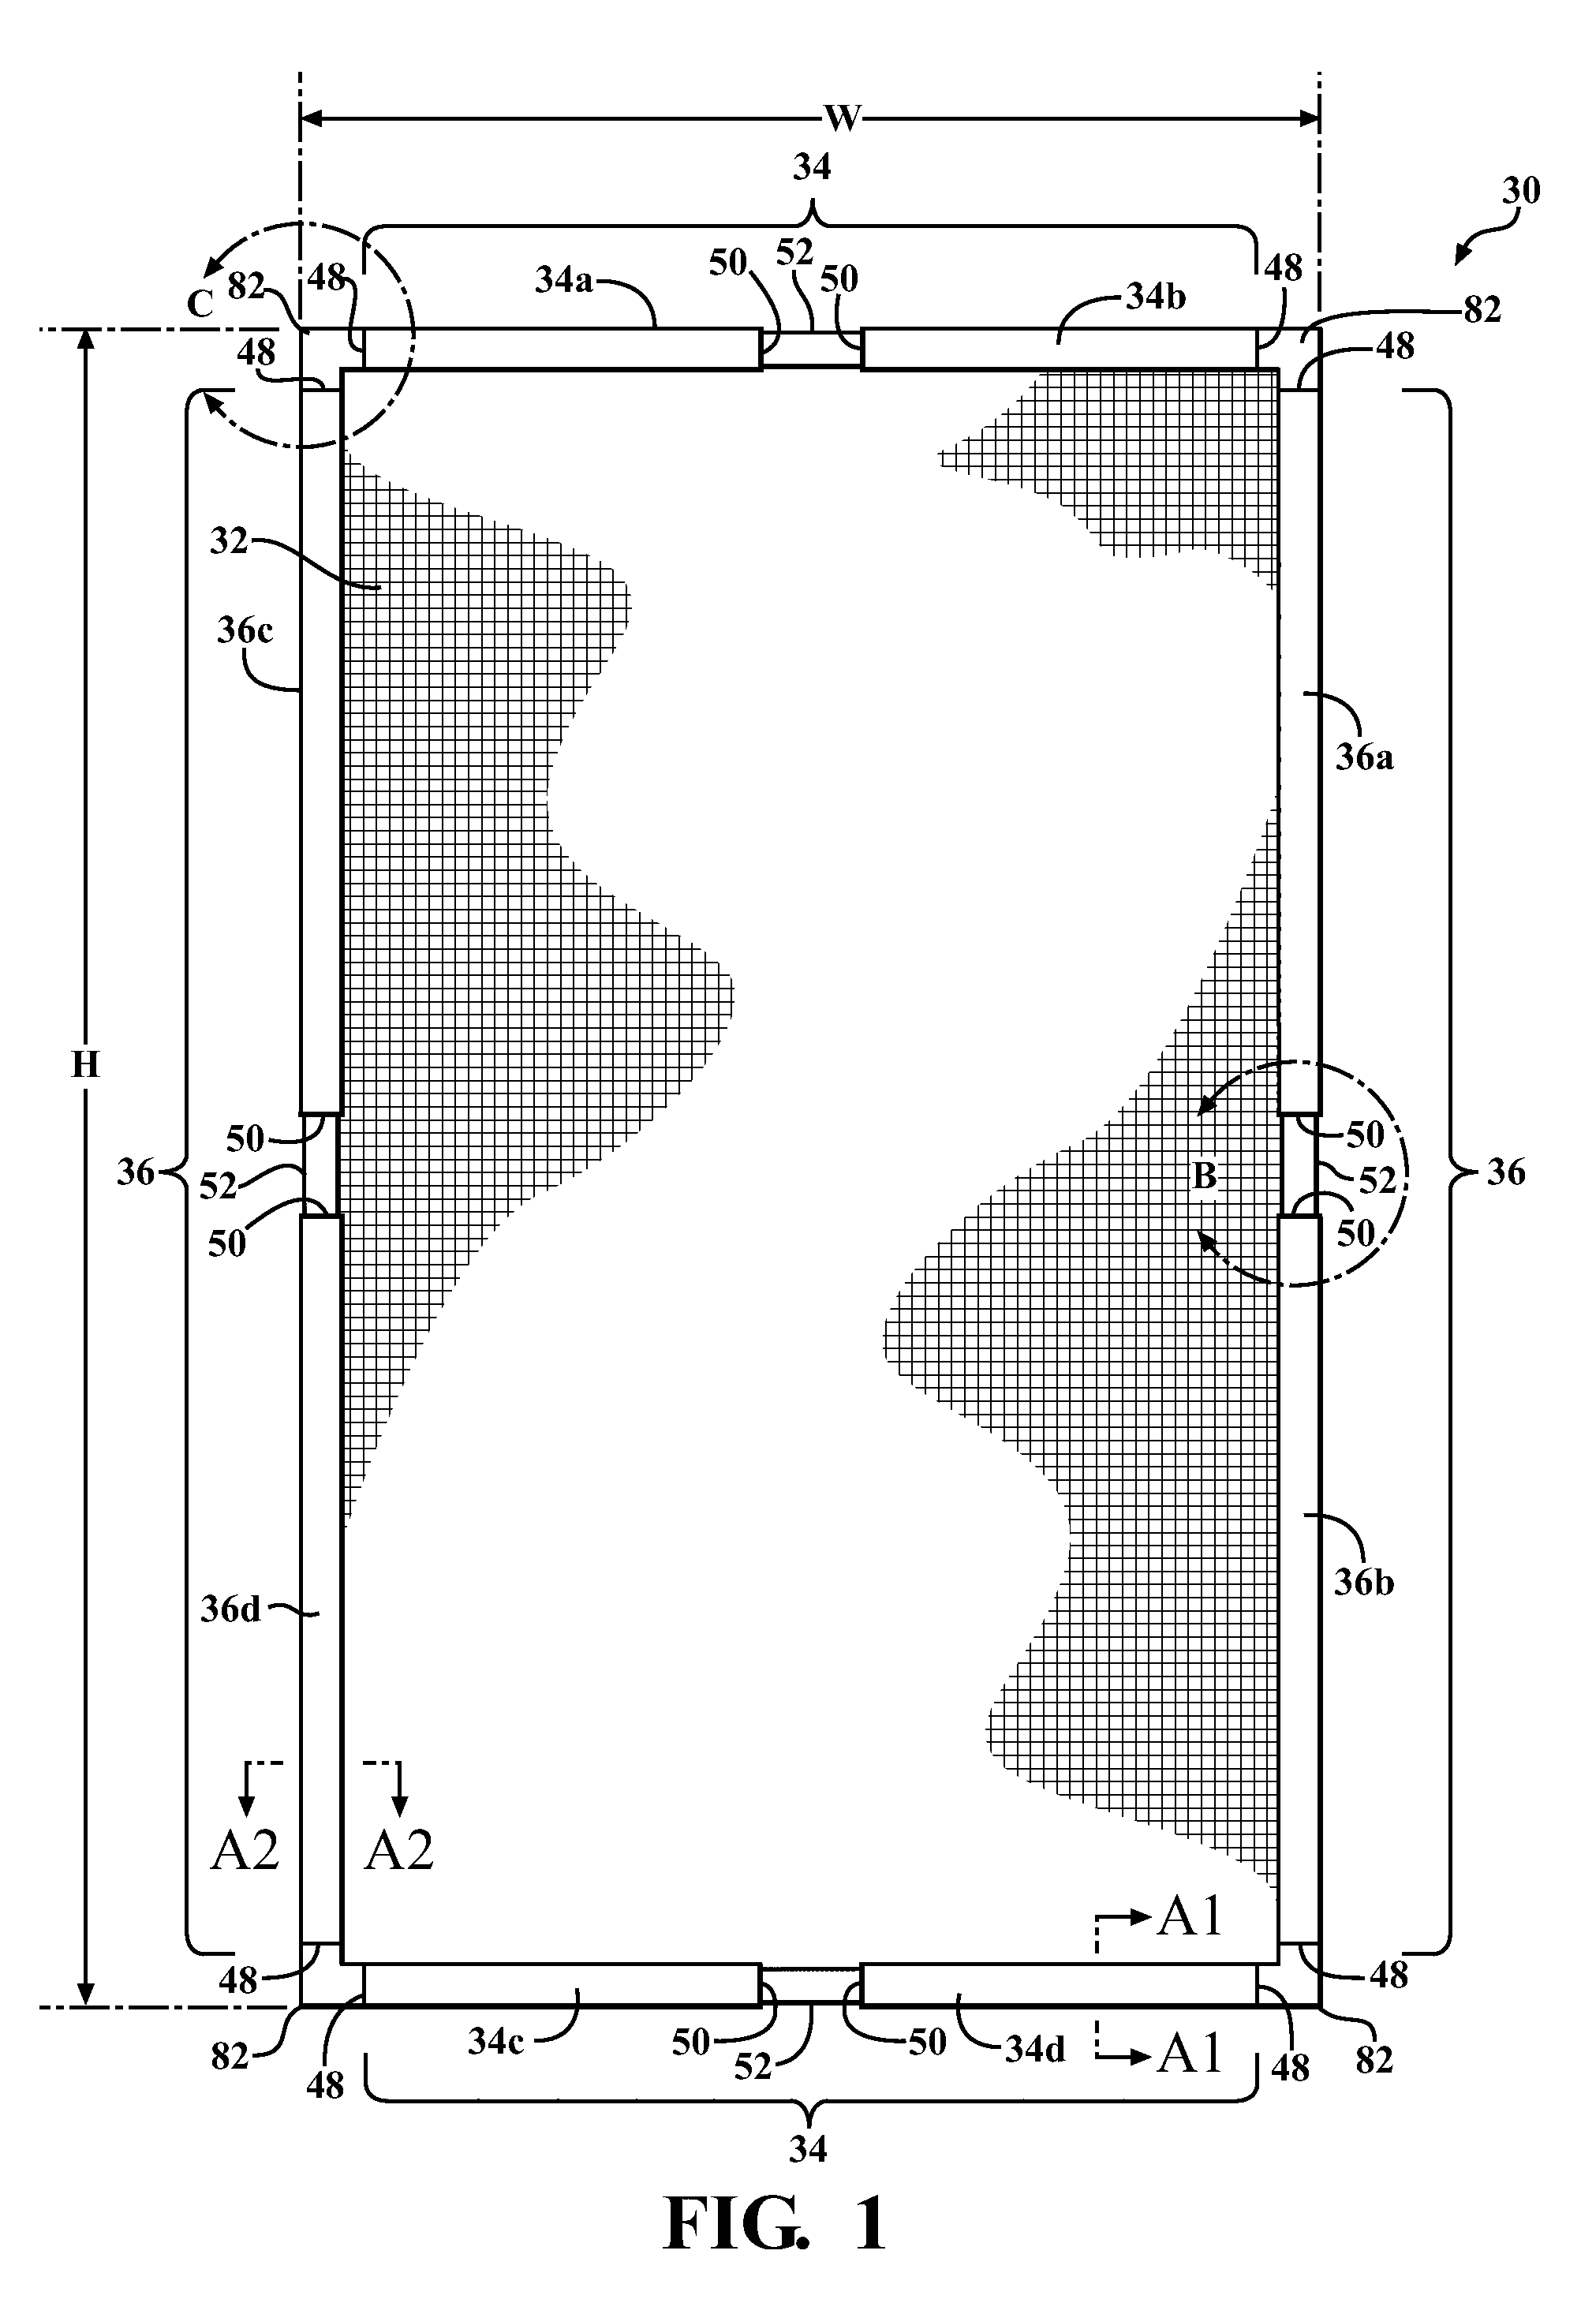 Adjustable frame assembly and method of assembling the adjustable frame assembly